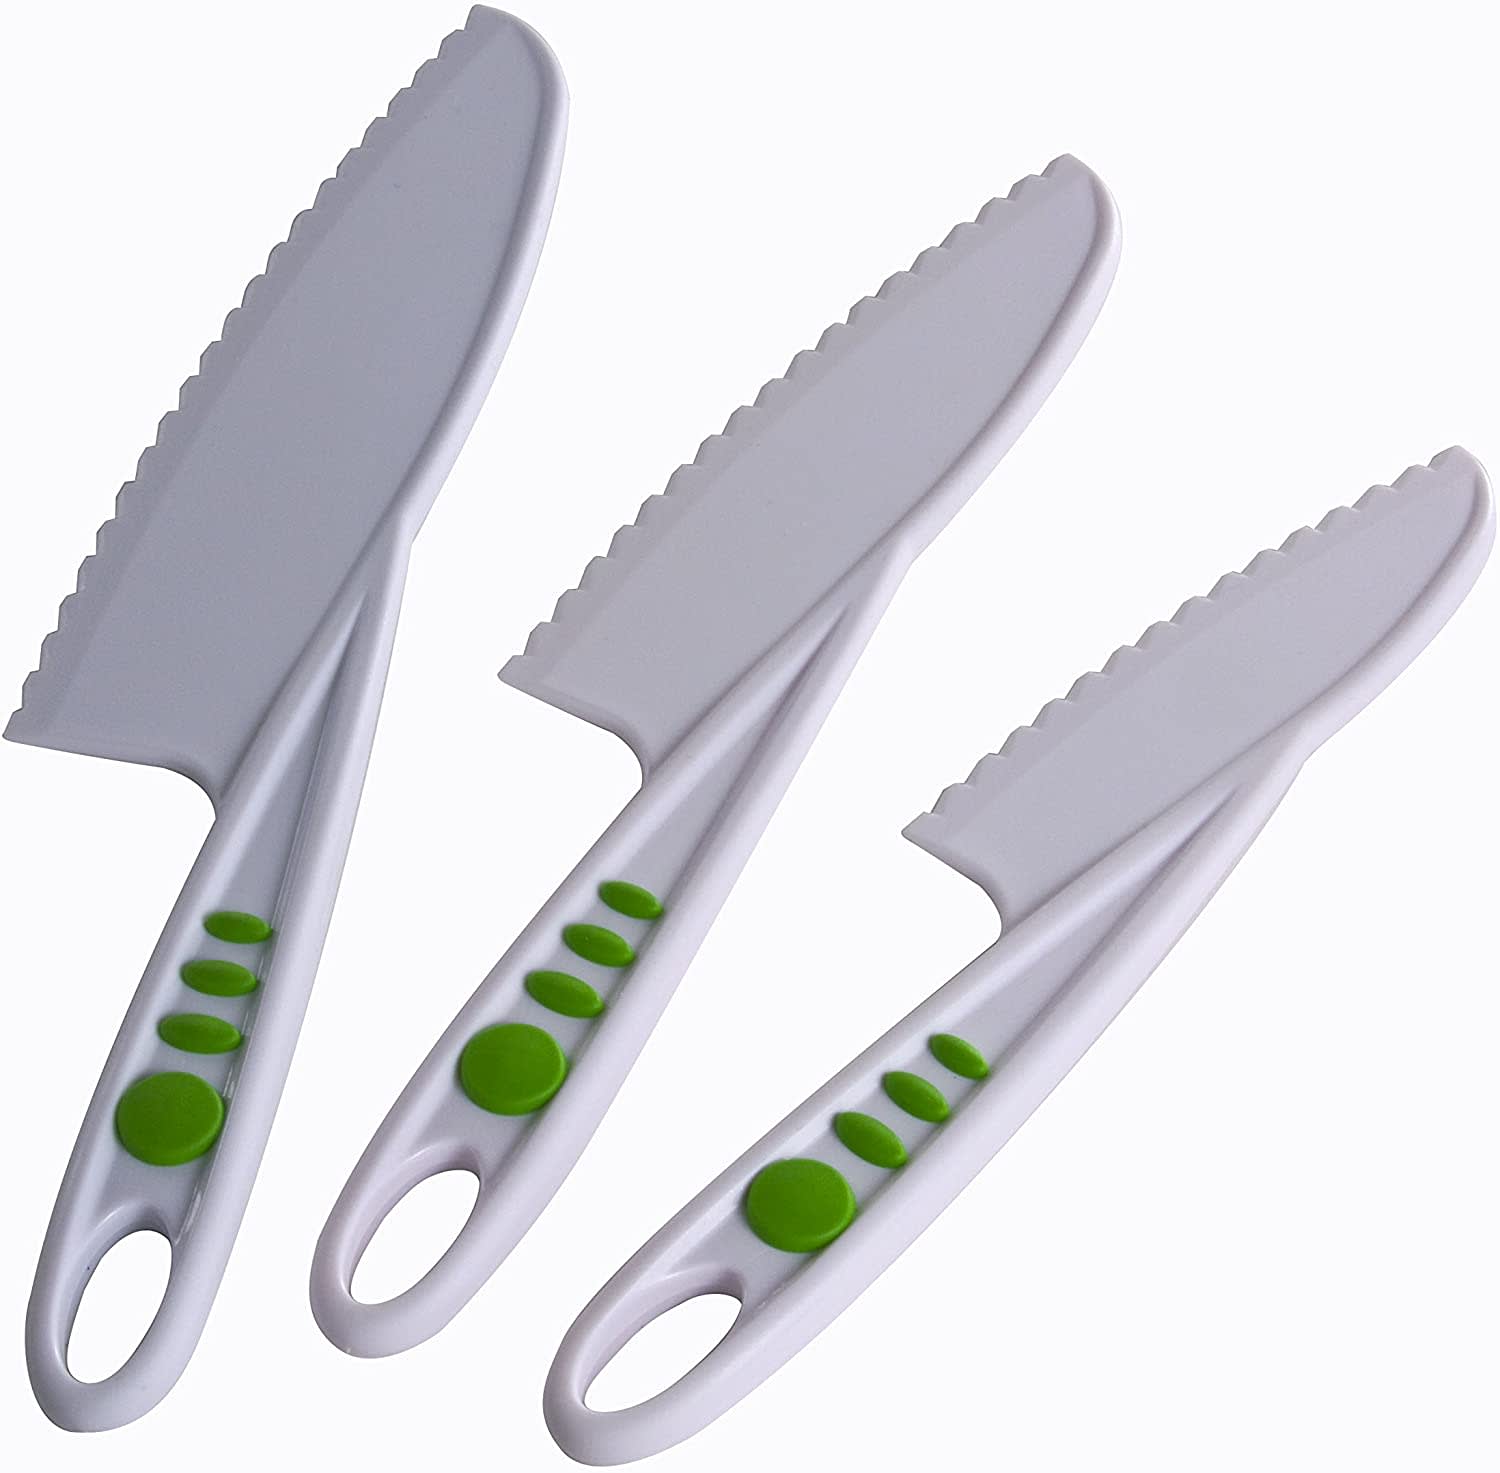 We Road Test Ten Children's Kitchen & Chef Knives. Here's What We